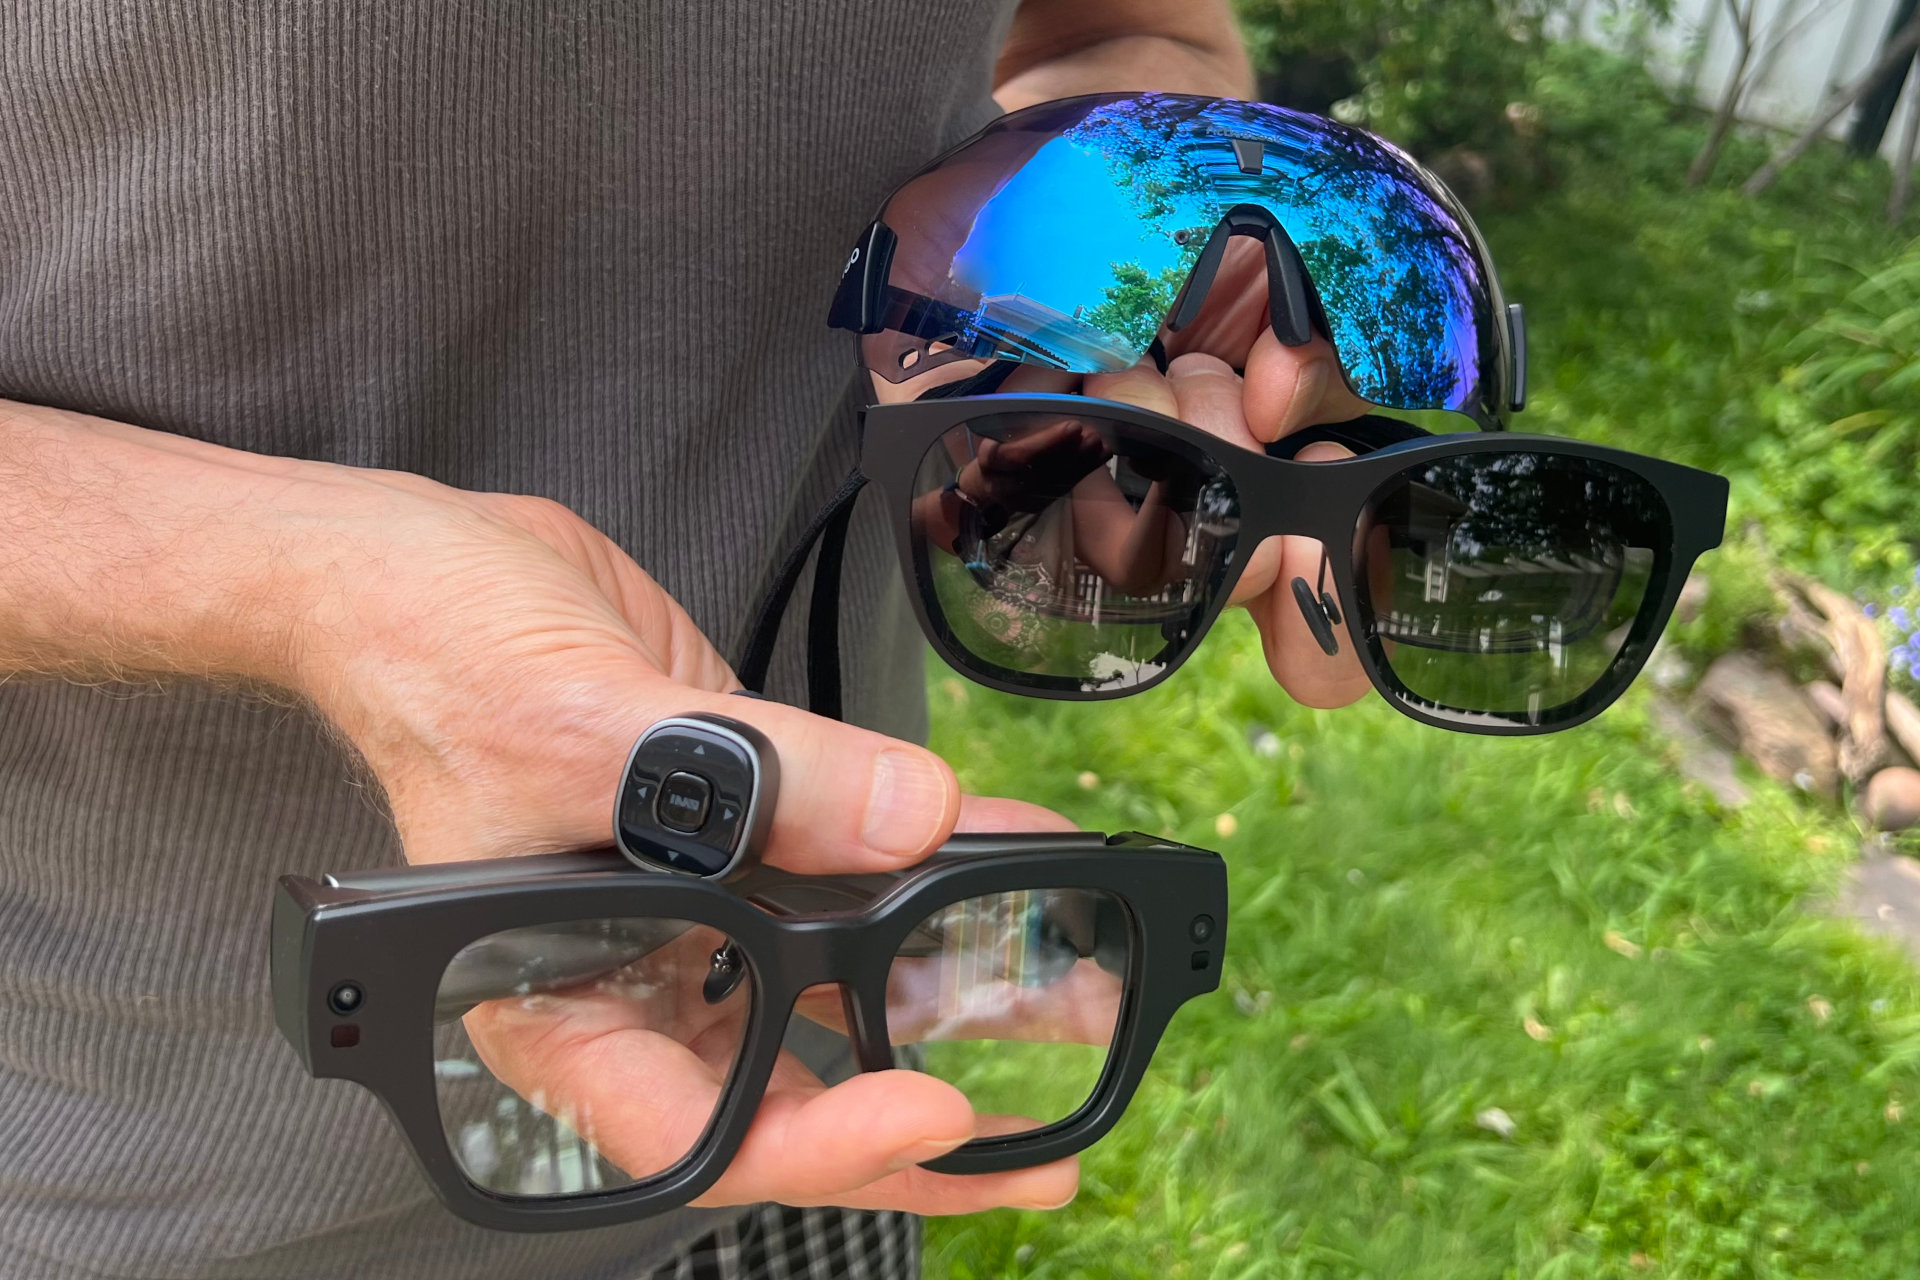 https://www.digitaltrends.com/wp-content/uploads/2023/07/Inmo-Air-2-Xreal-Air-and-Engo-2-smart-glasses-are-held-in-hands.jpg?p=1